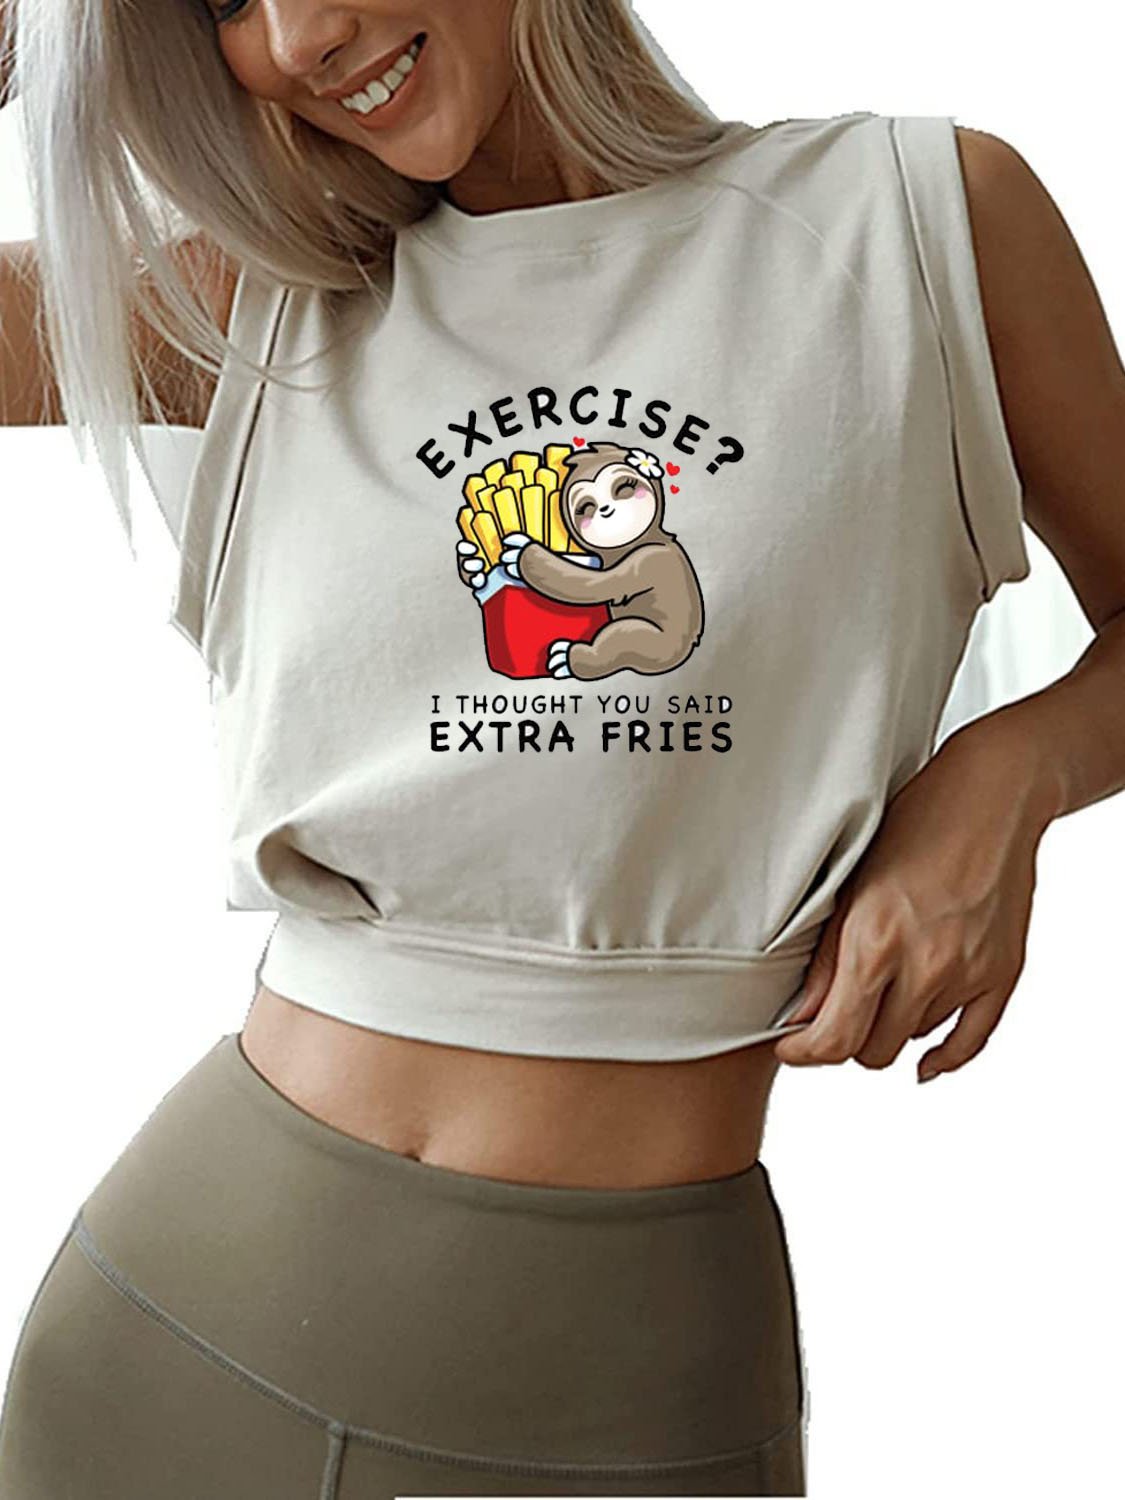 EXERCISE I THOUGHT YOU SAID EXTRA FRIES SLEEVELESS CROP TOPS